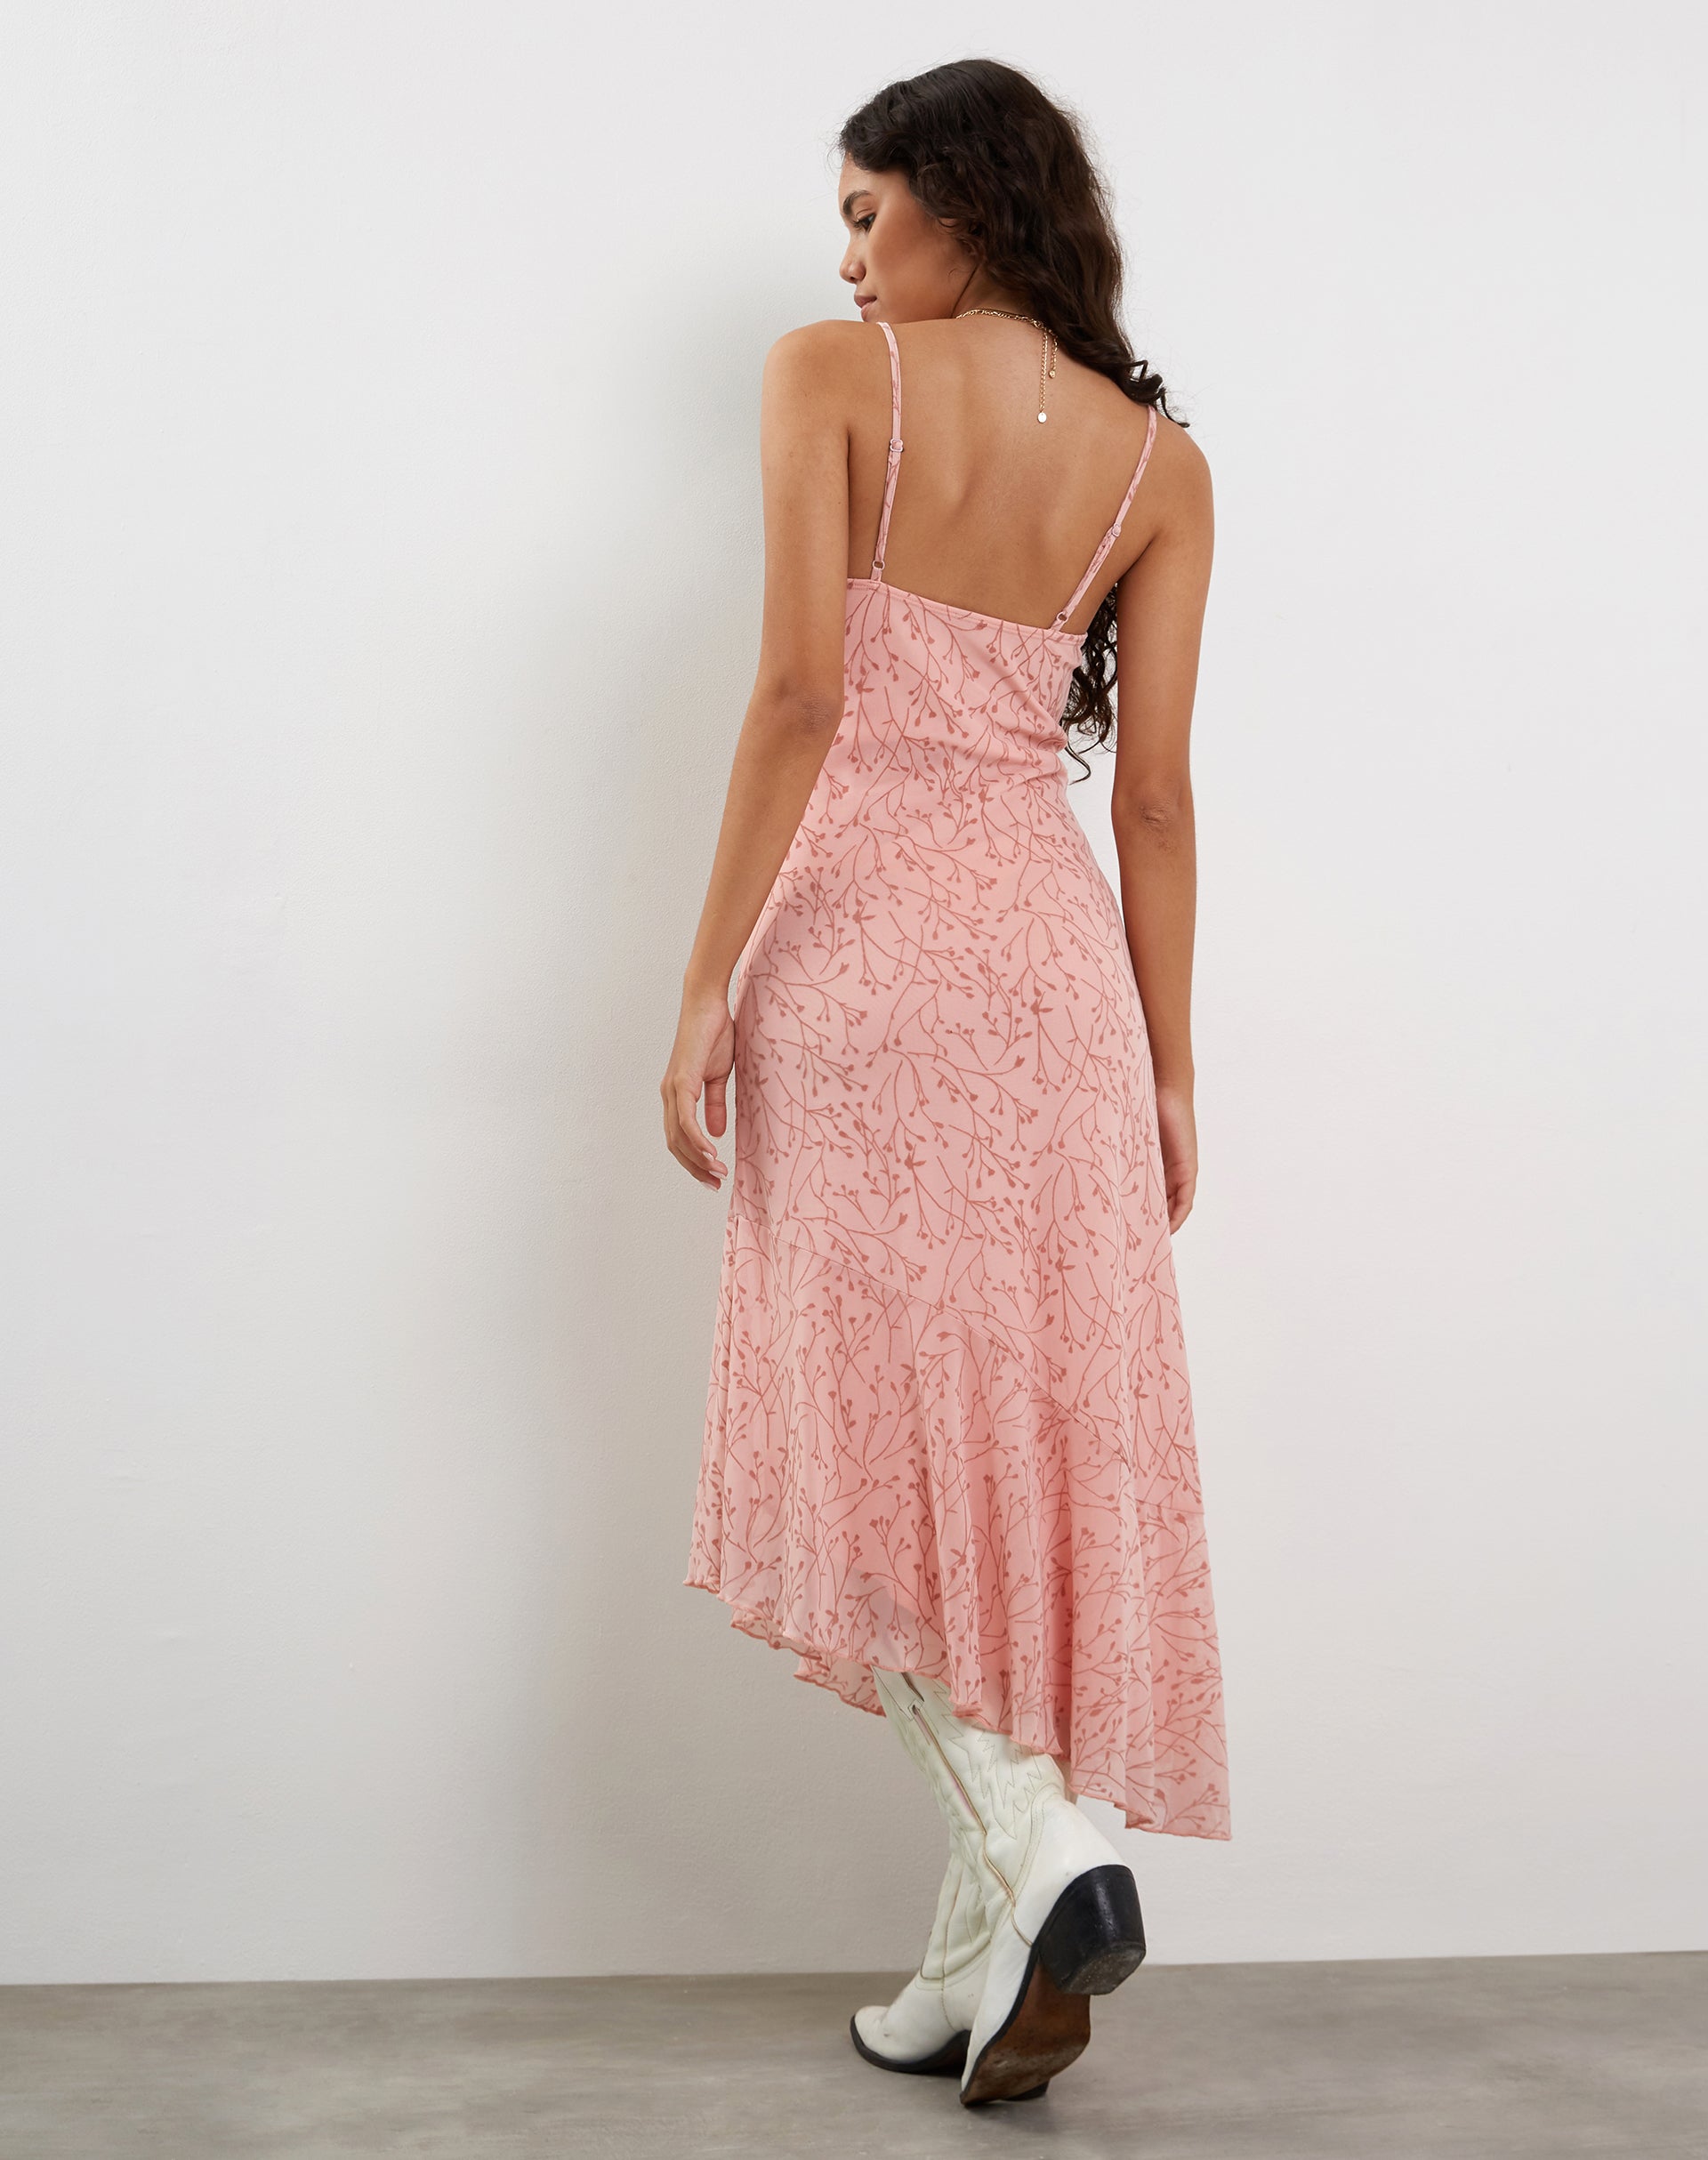 Image of Kavala Asymmetric Midi Dress in Shadow Floral Pink